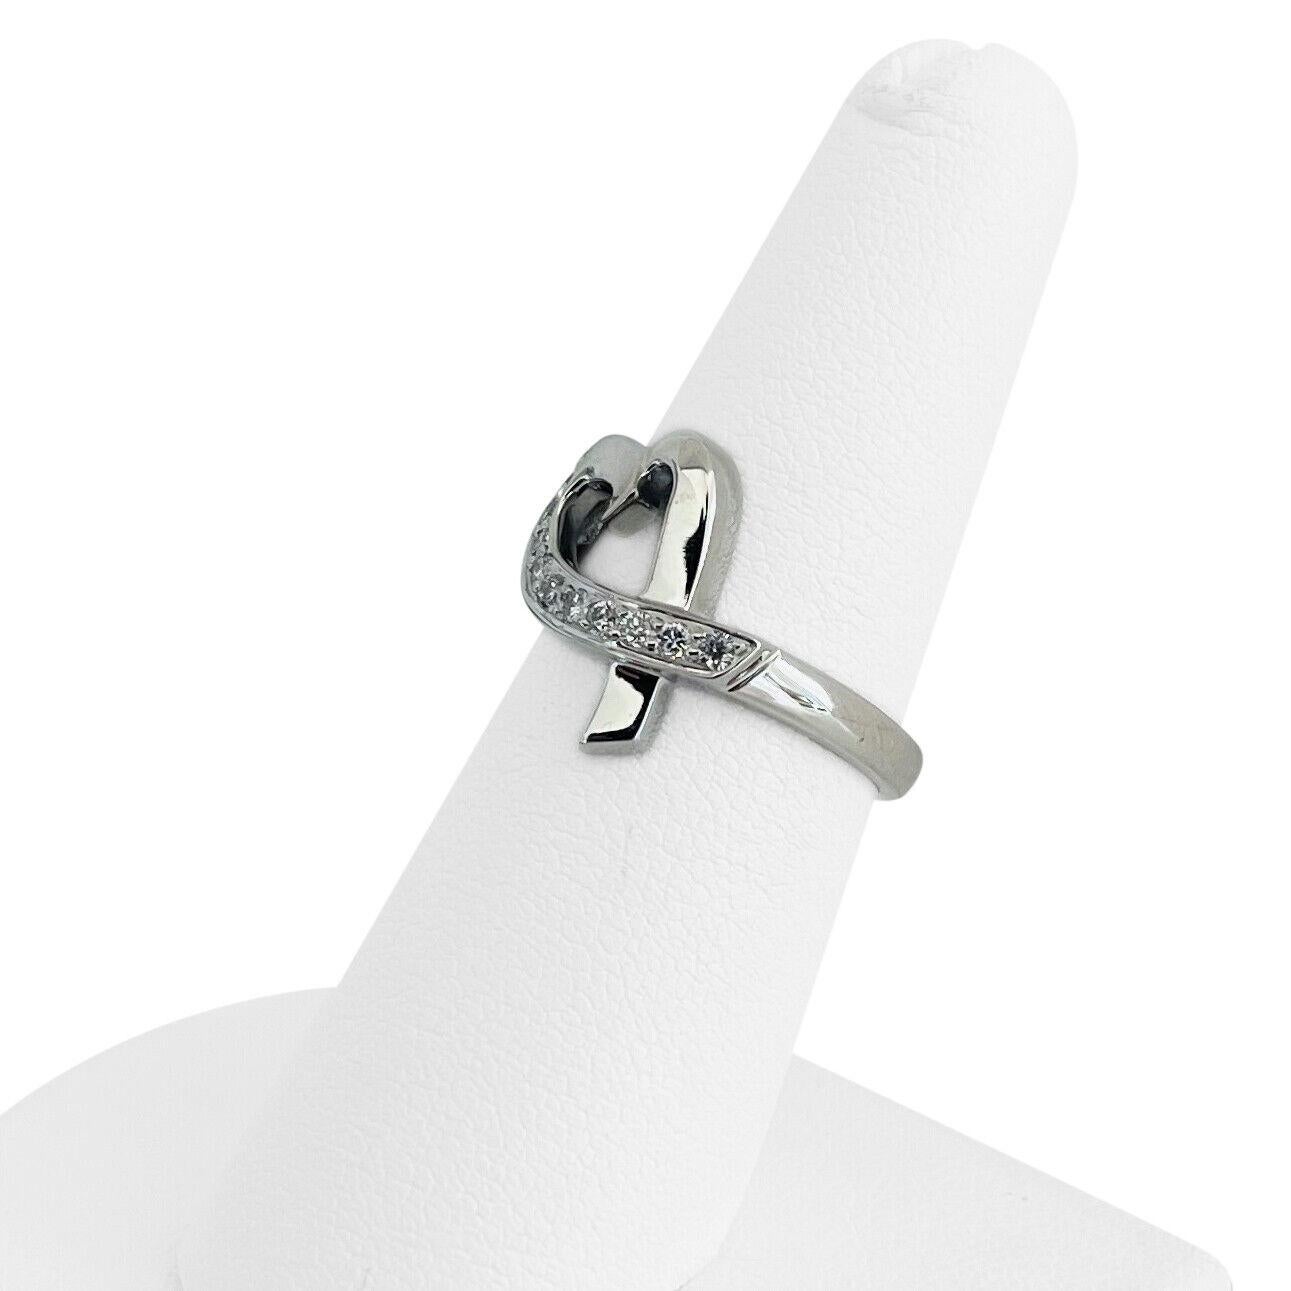 Tiffany & Co. Paloma Picasso Loving Heart 18k White Gold Diamond Ring Size 6.5

Condition:  Excellent Condition, Professionally Cleaned and Polished
Metal:  18k Gold (Marked, and Professionally Tested)
Weight:  4.2g
Diamonds:  Round Brilliant